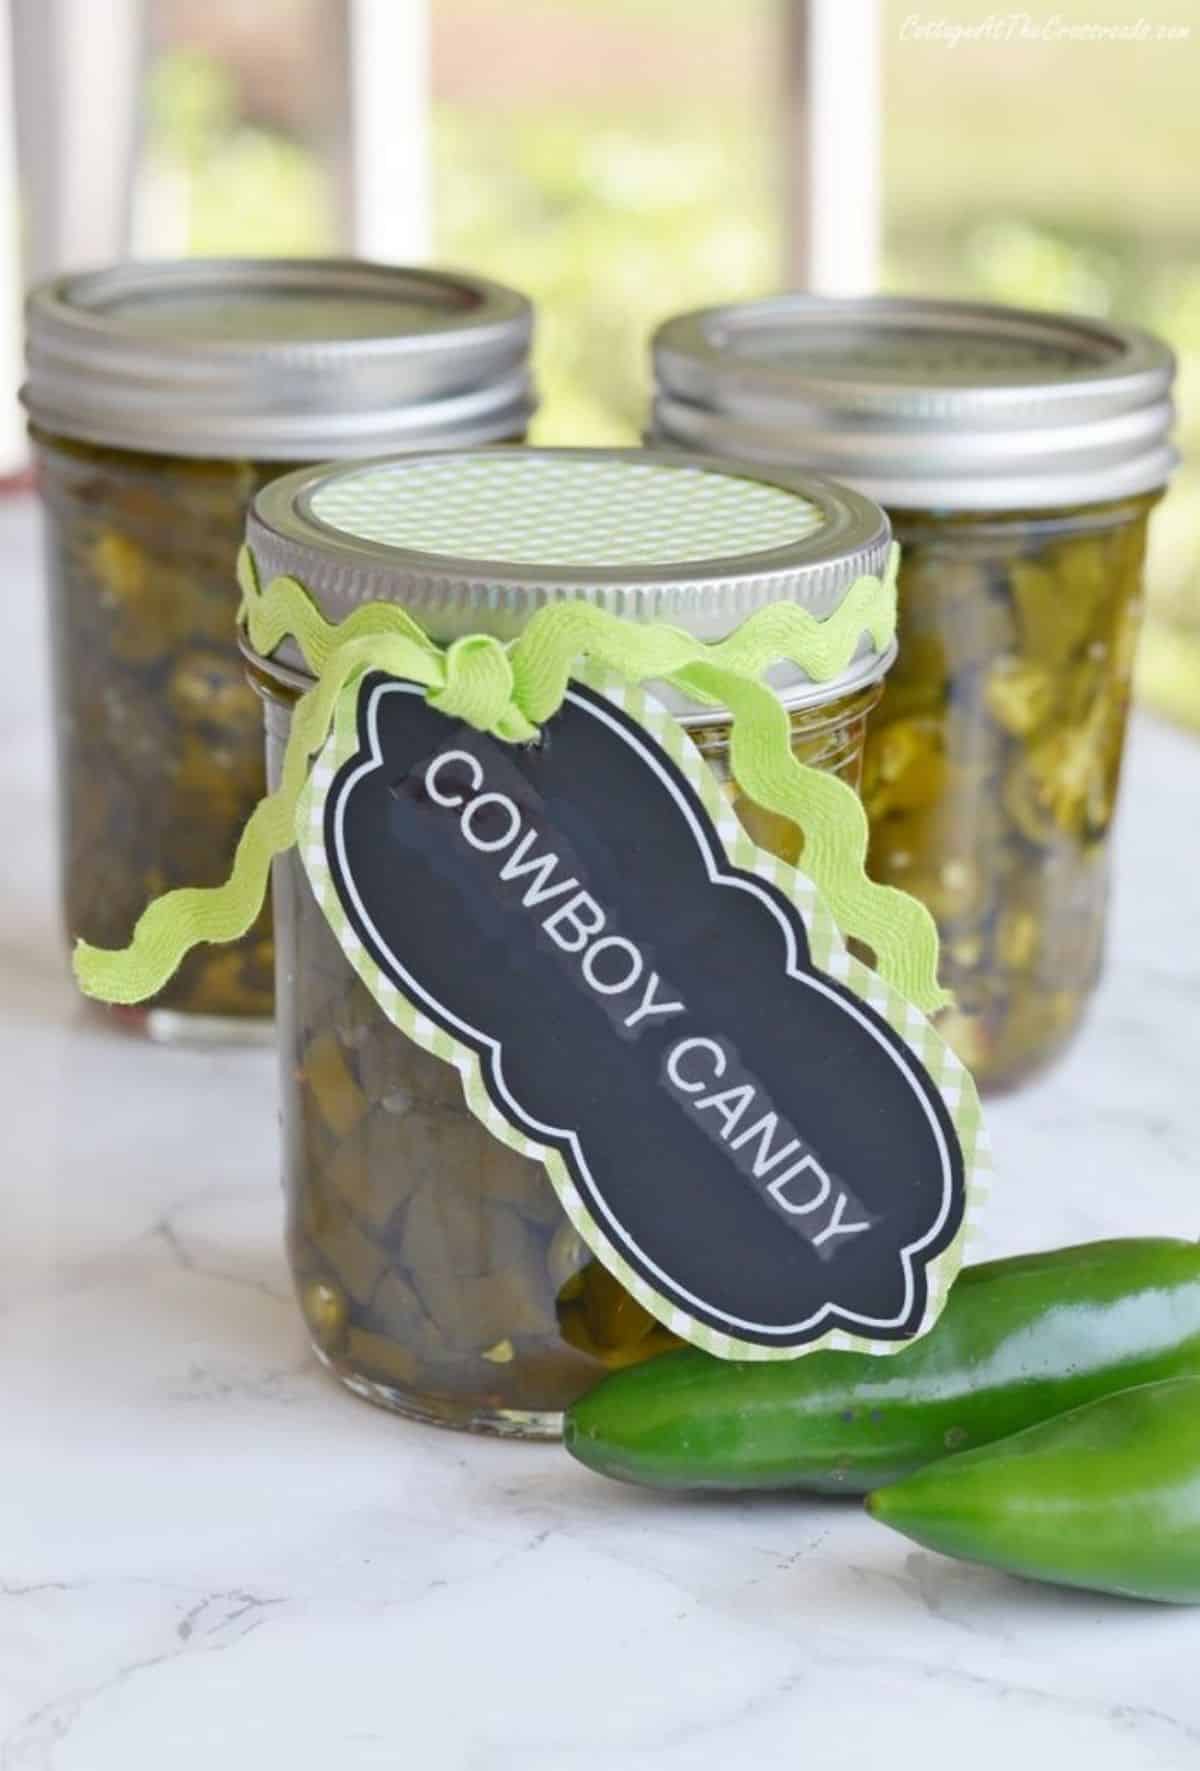 Candied jalapenos in three glass jars.